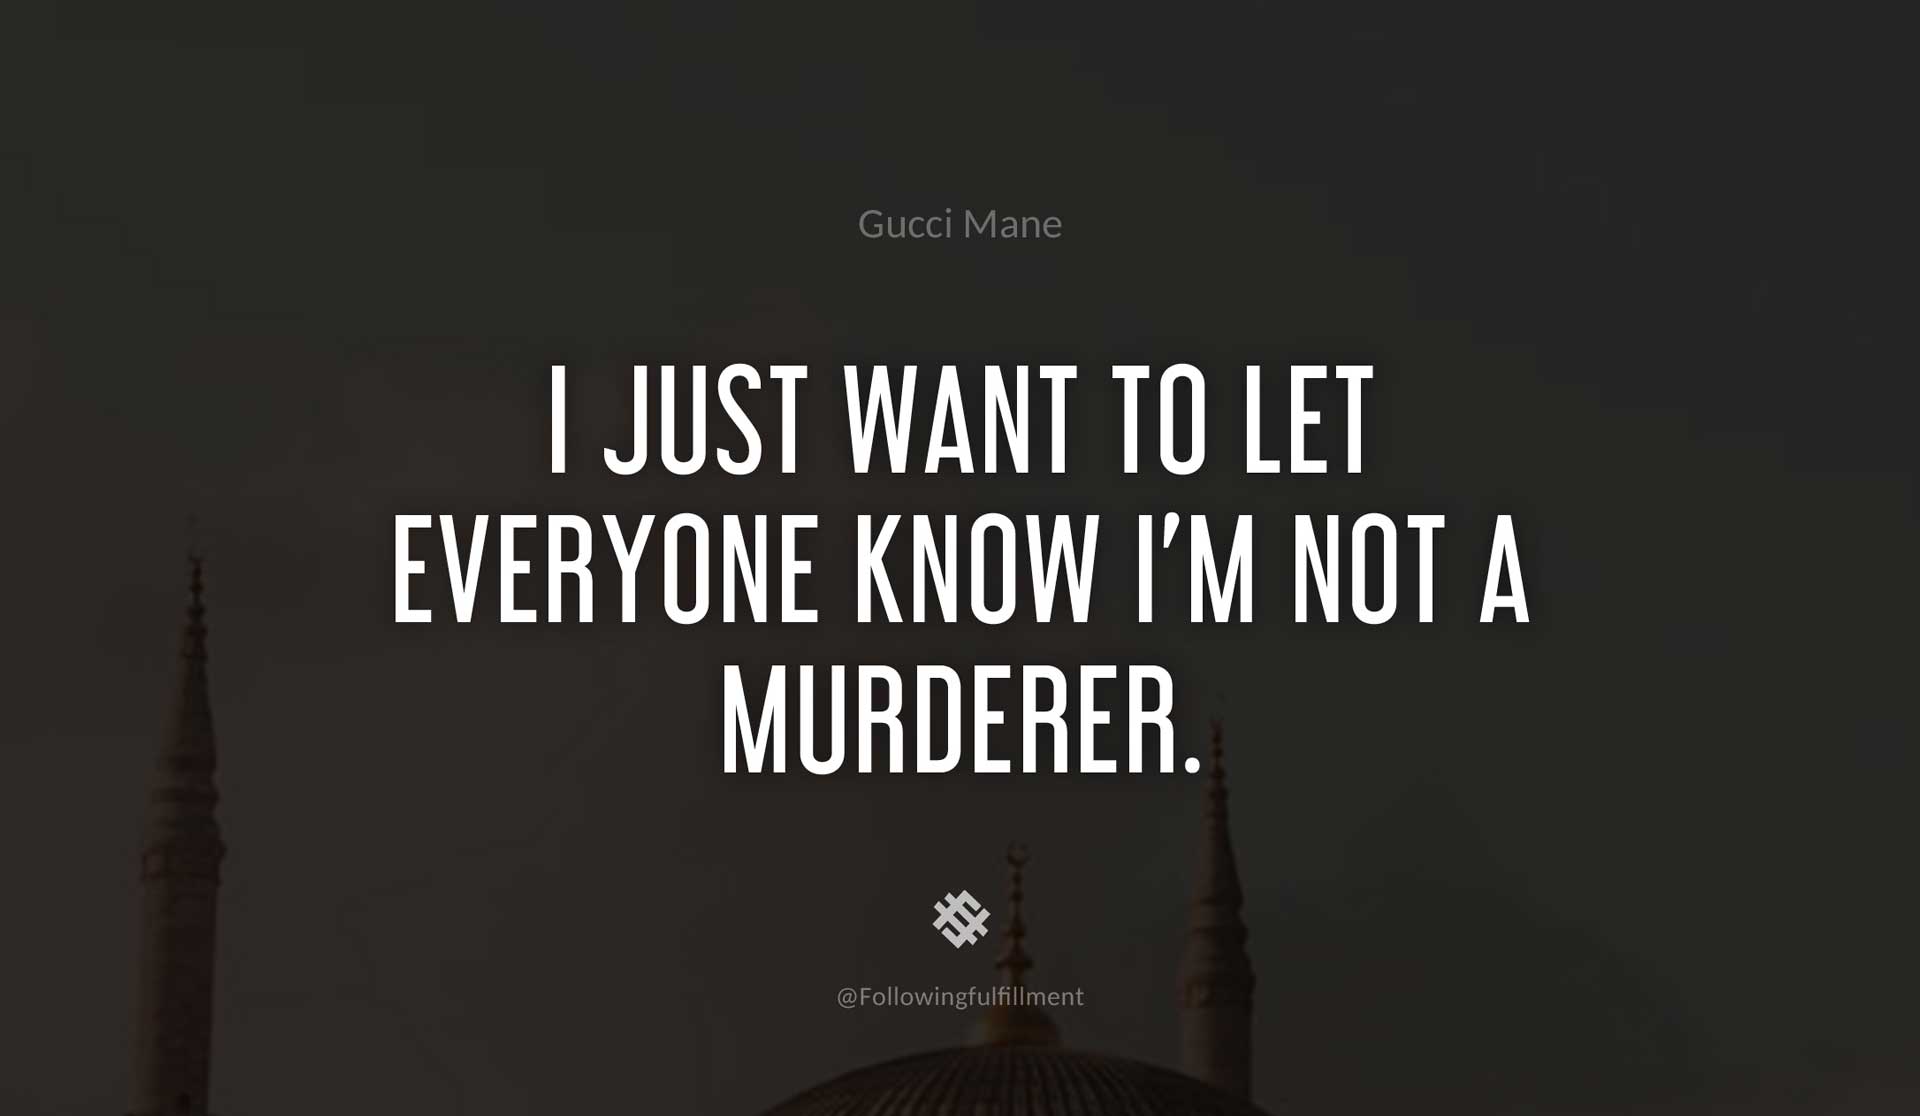 I-just-want-to-let-everyone-know-I'm-not-a-murderer.-GUCCI-MANE-Quote.jpg